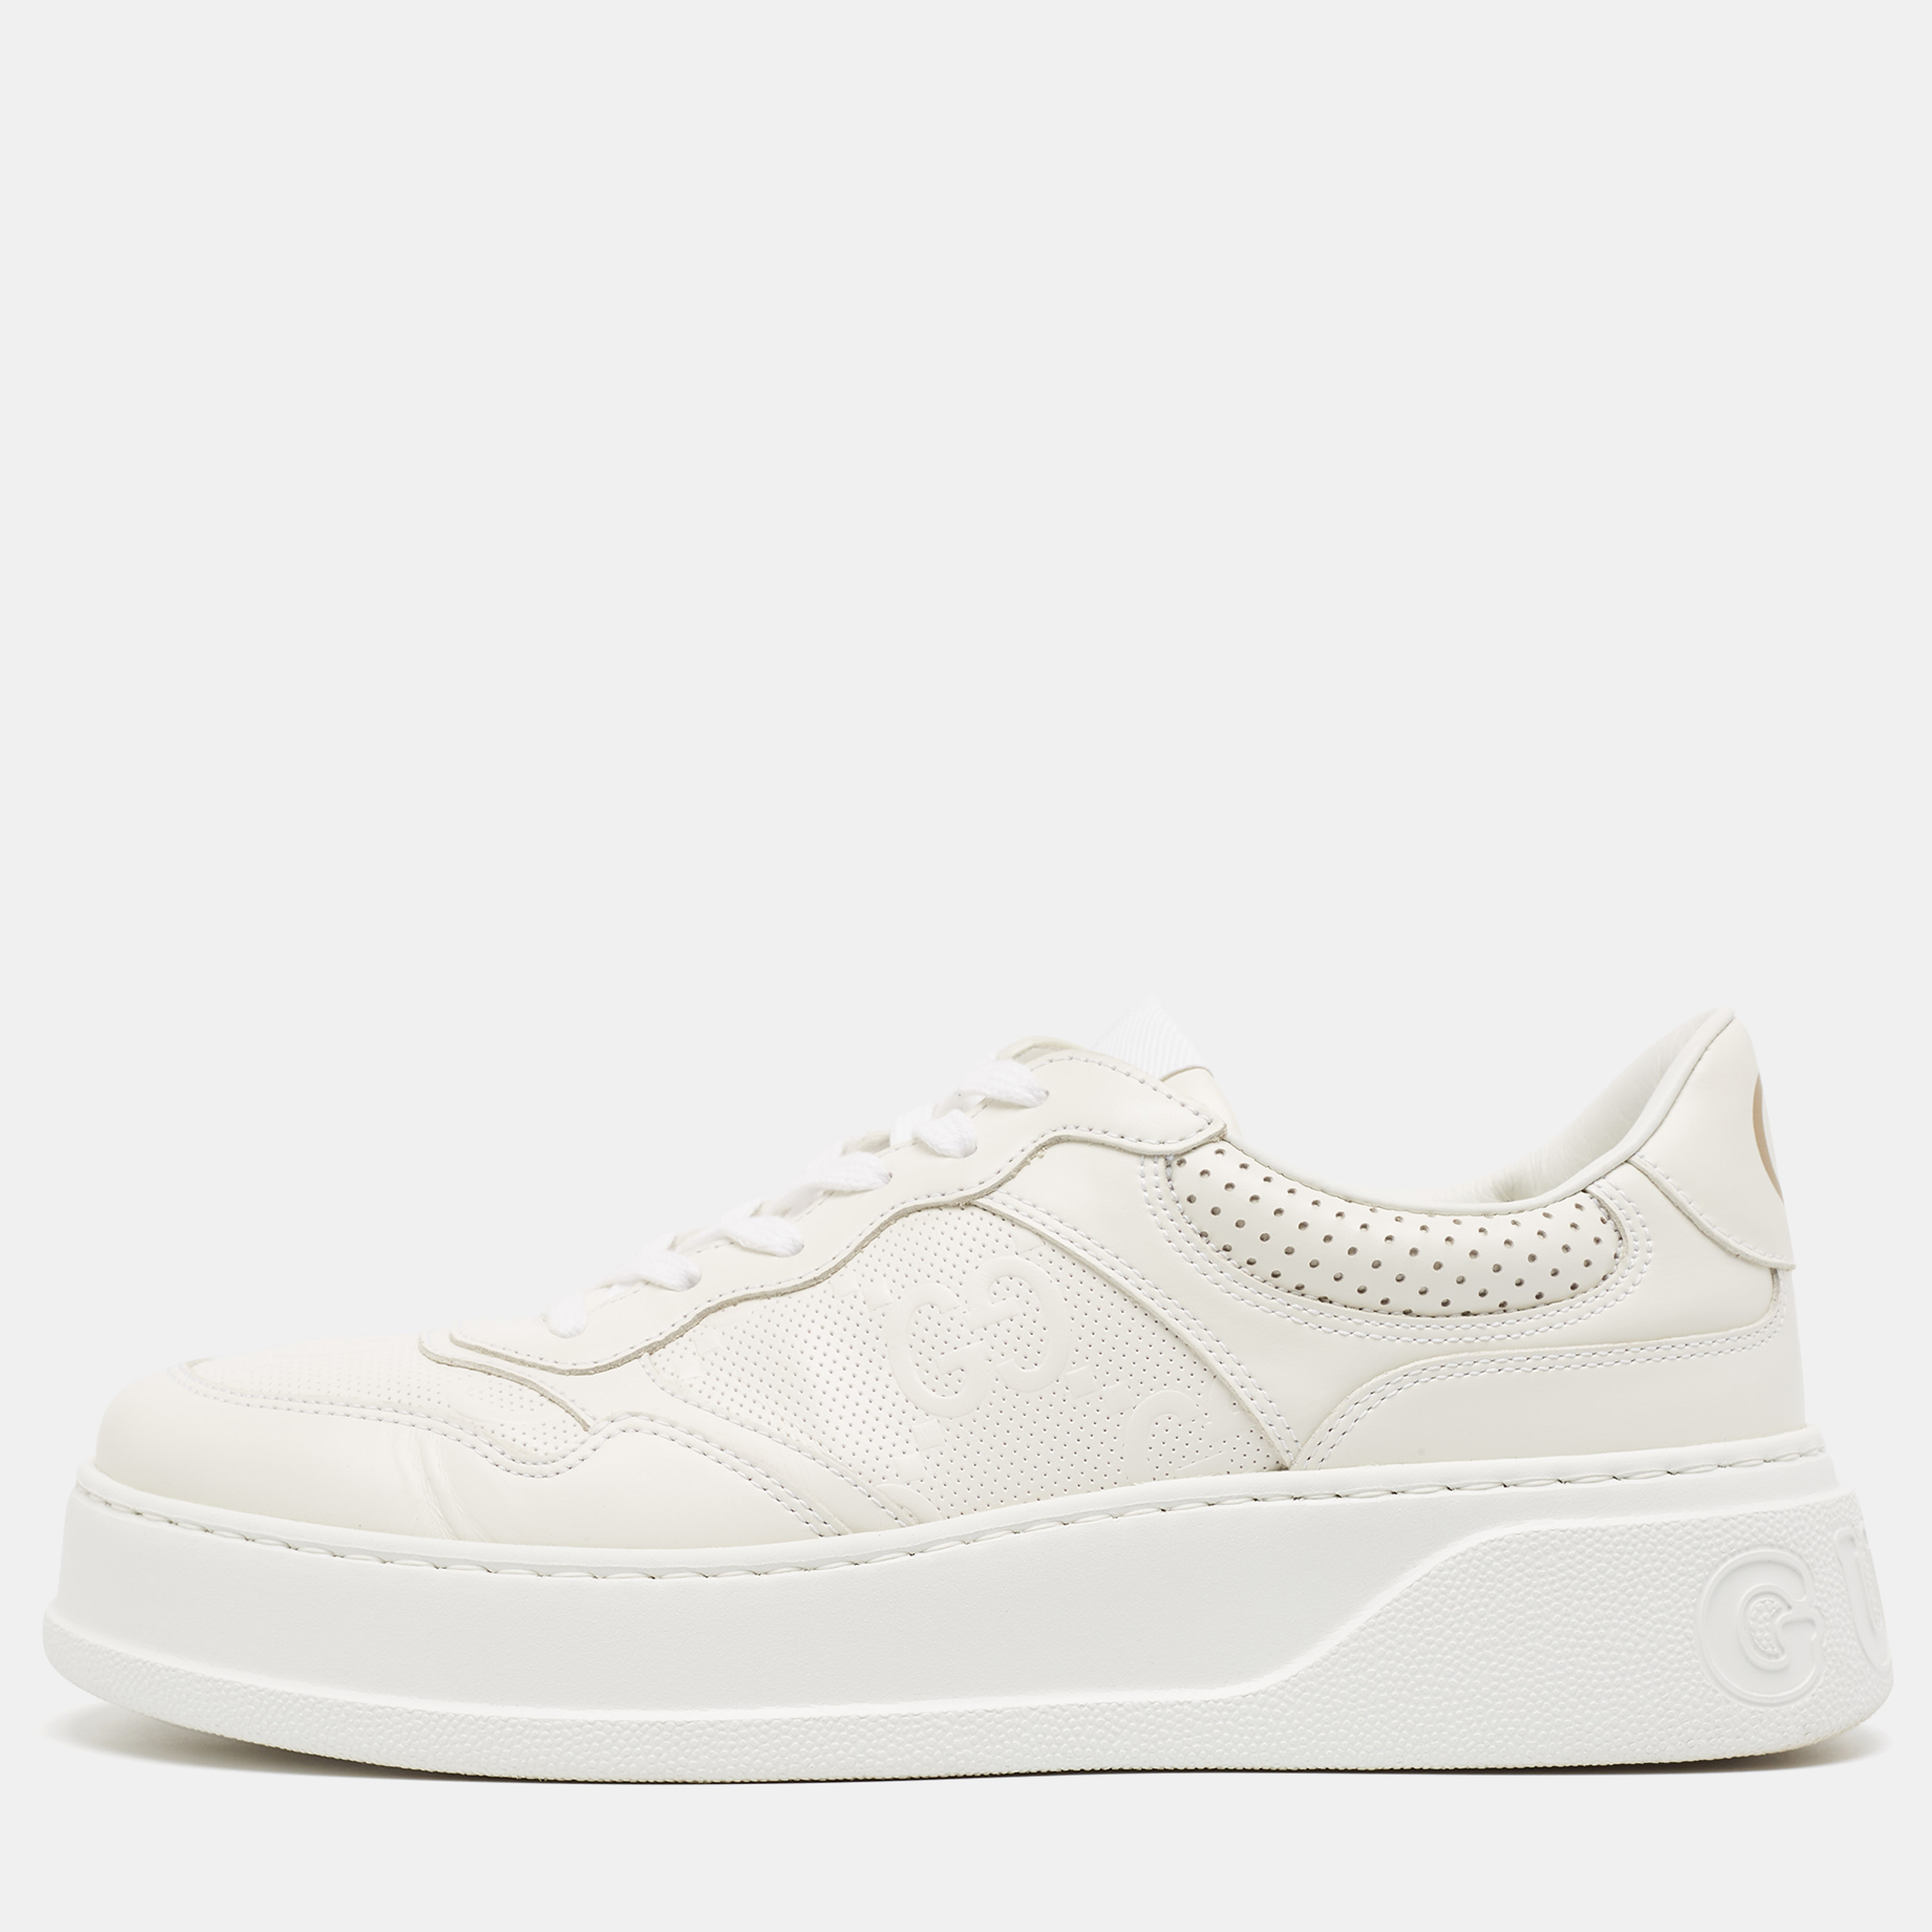 Gucci white leather gg low top sneakers  size 43